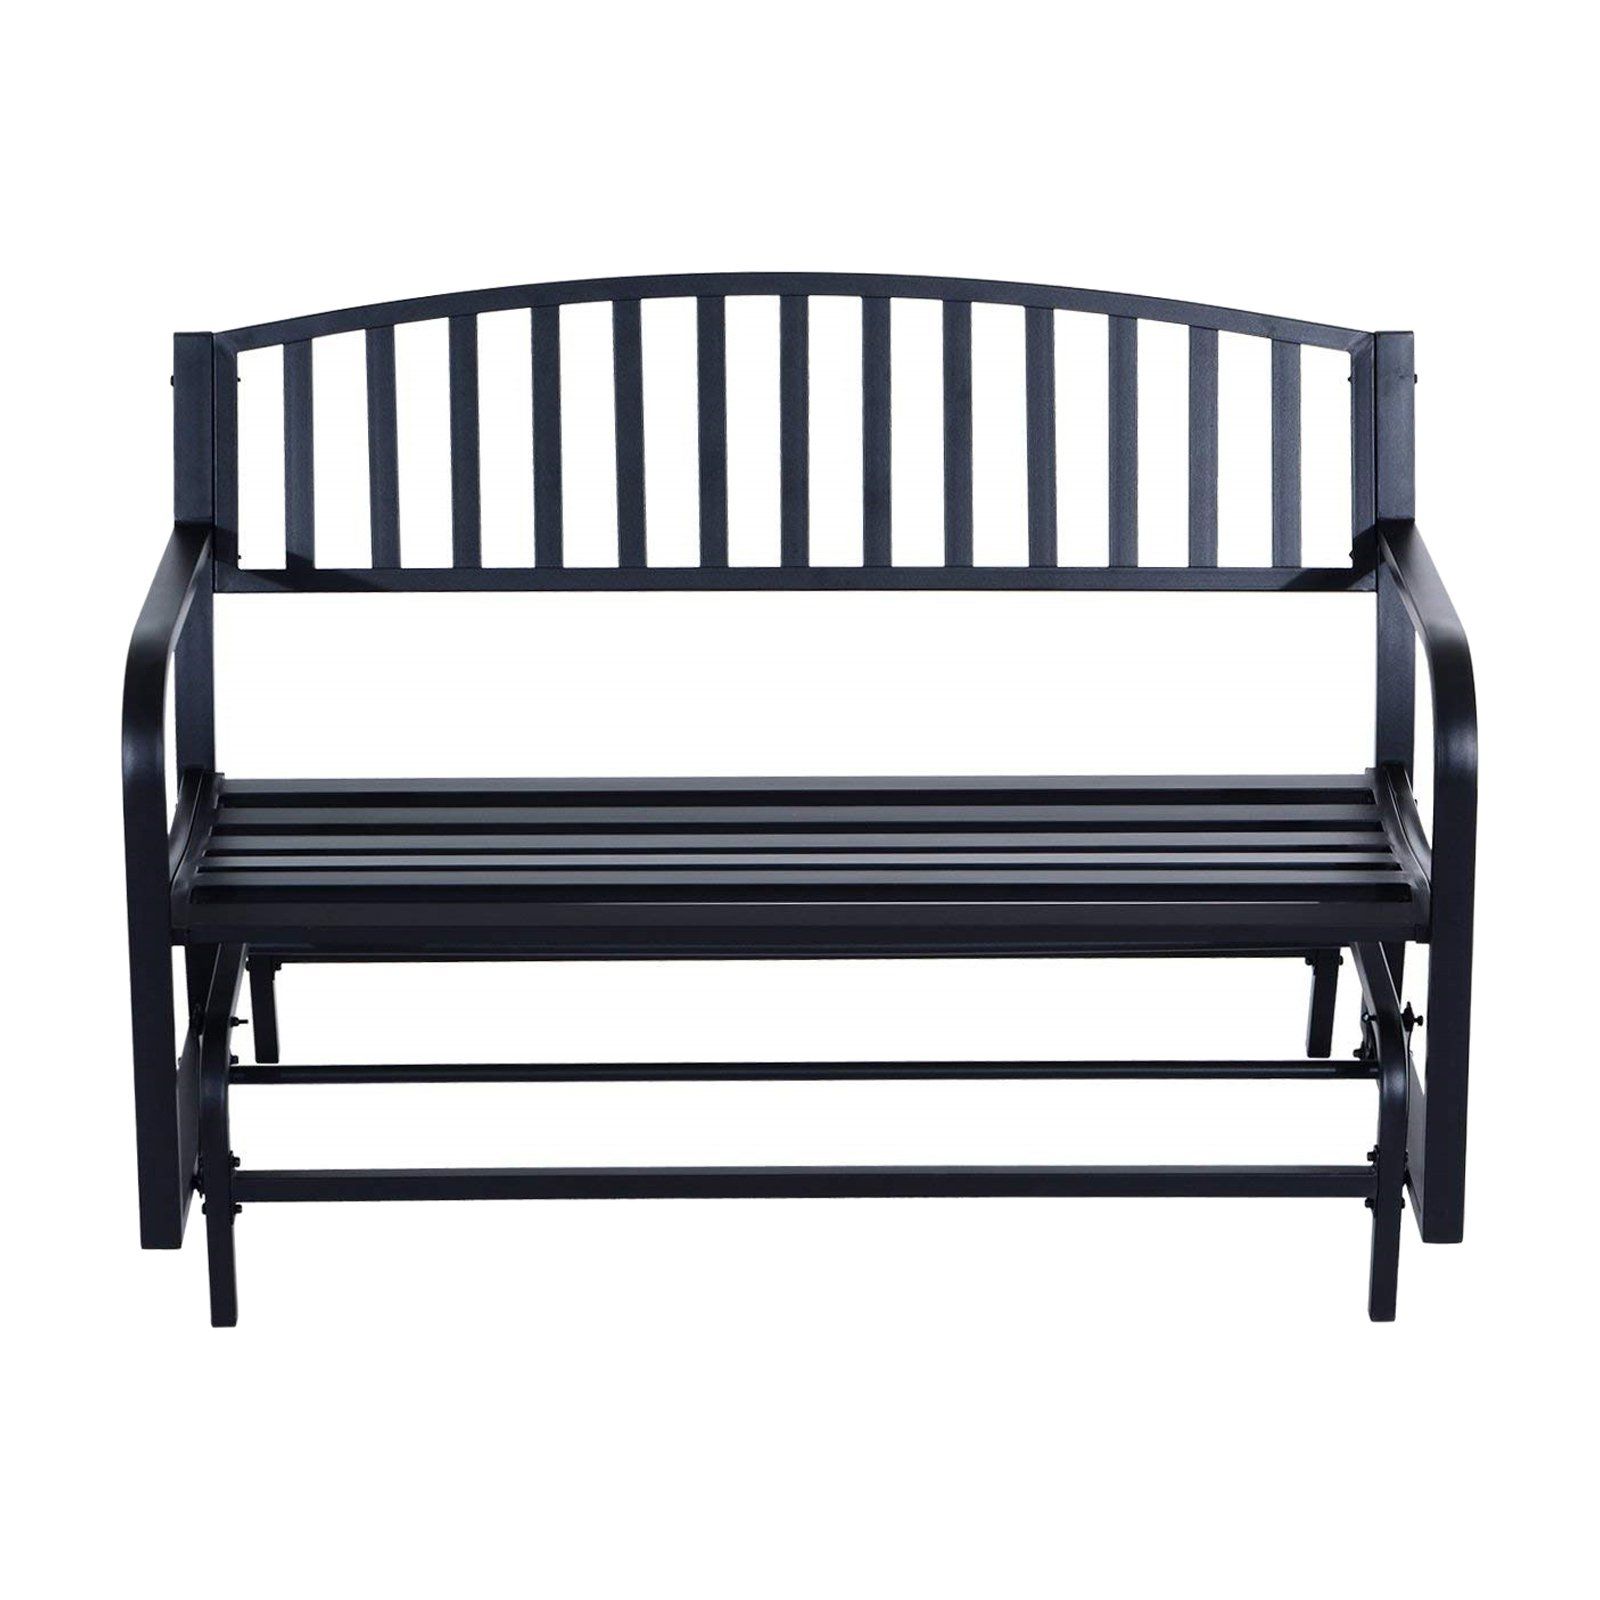 Recent Outdoor Steel Patio Swing Glider Benches In Outsunny Weather Resistant Steel Outdoor Porch Swing – Black (View 14 of 25)